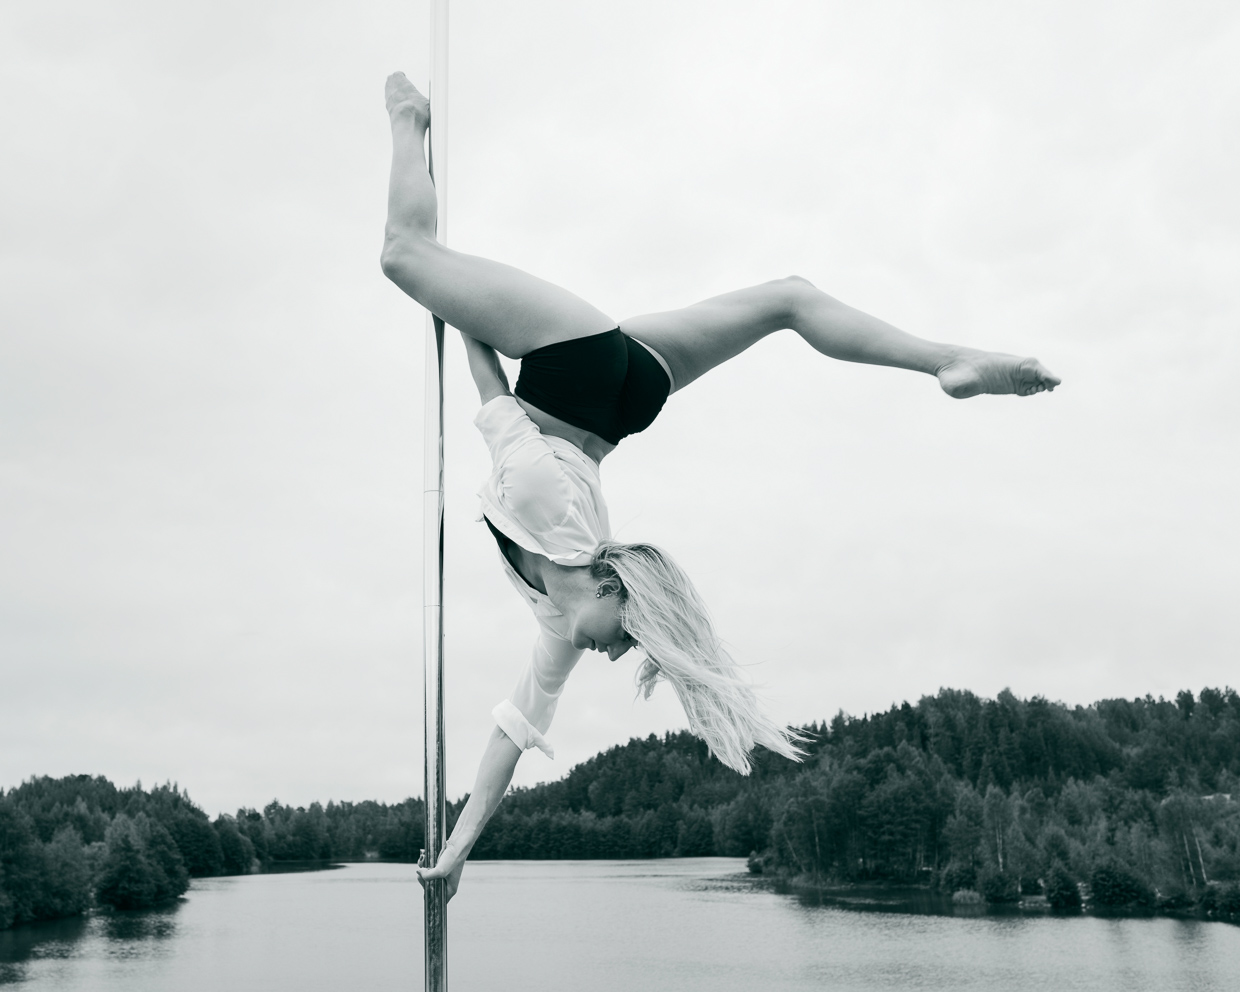 Helle Carlstedt doing a butterfly on the pole with the Blue Lagoon in the background.